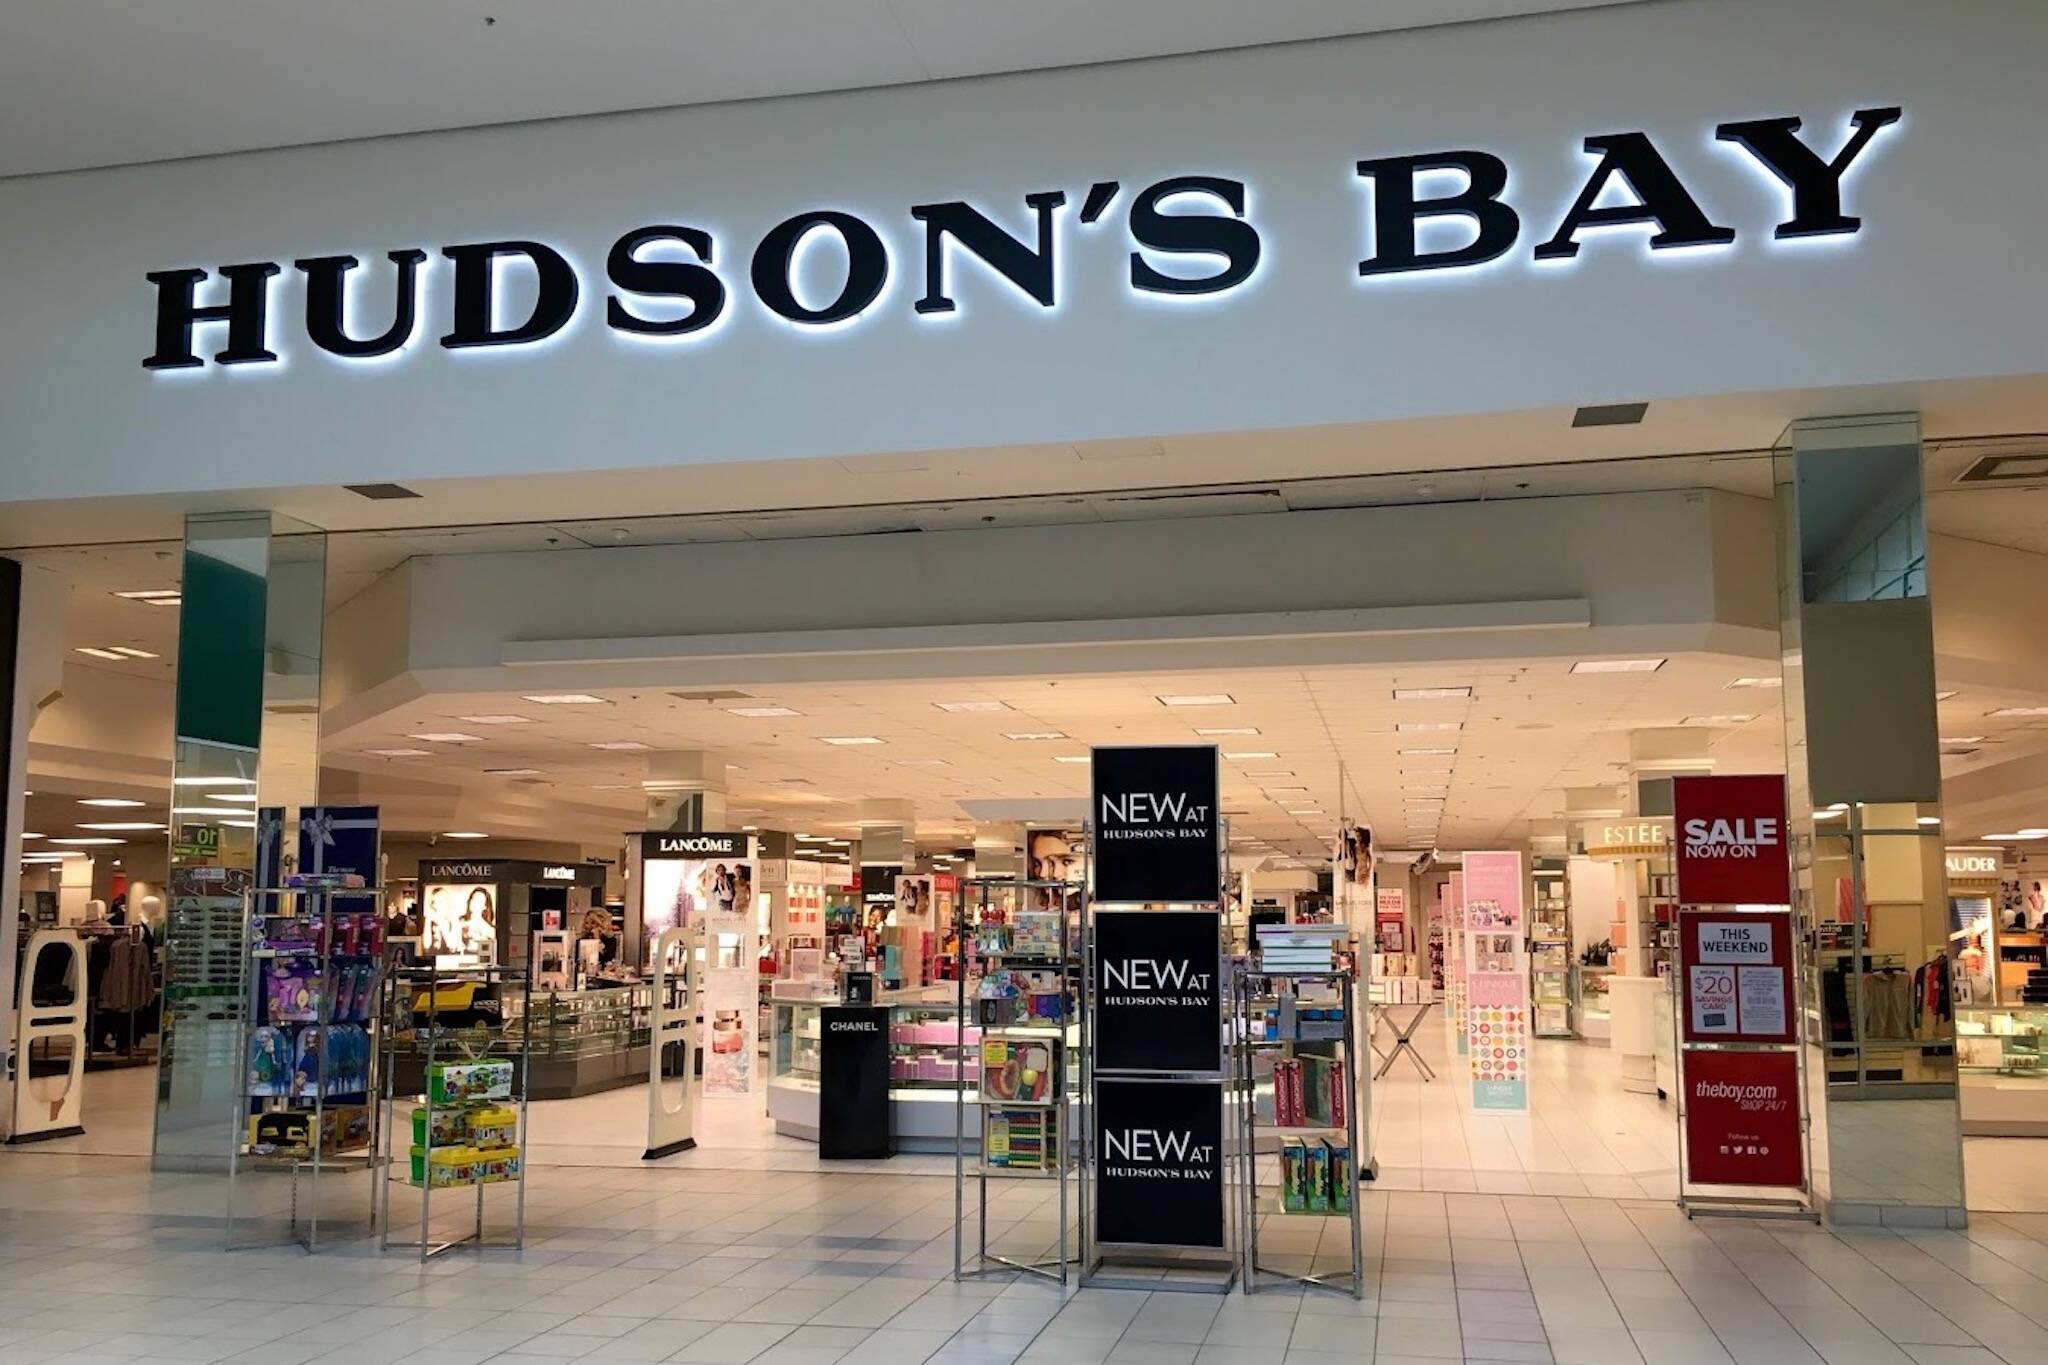 Hudson's Bay permanently closing another department store in Ontario